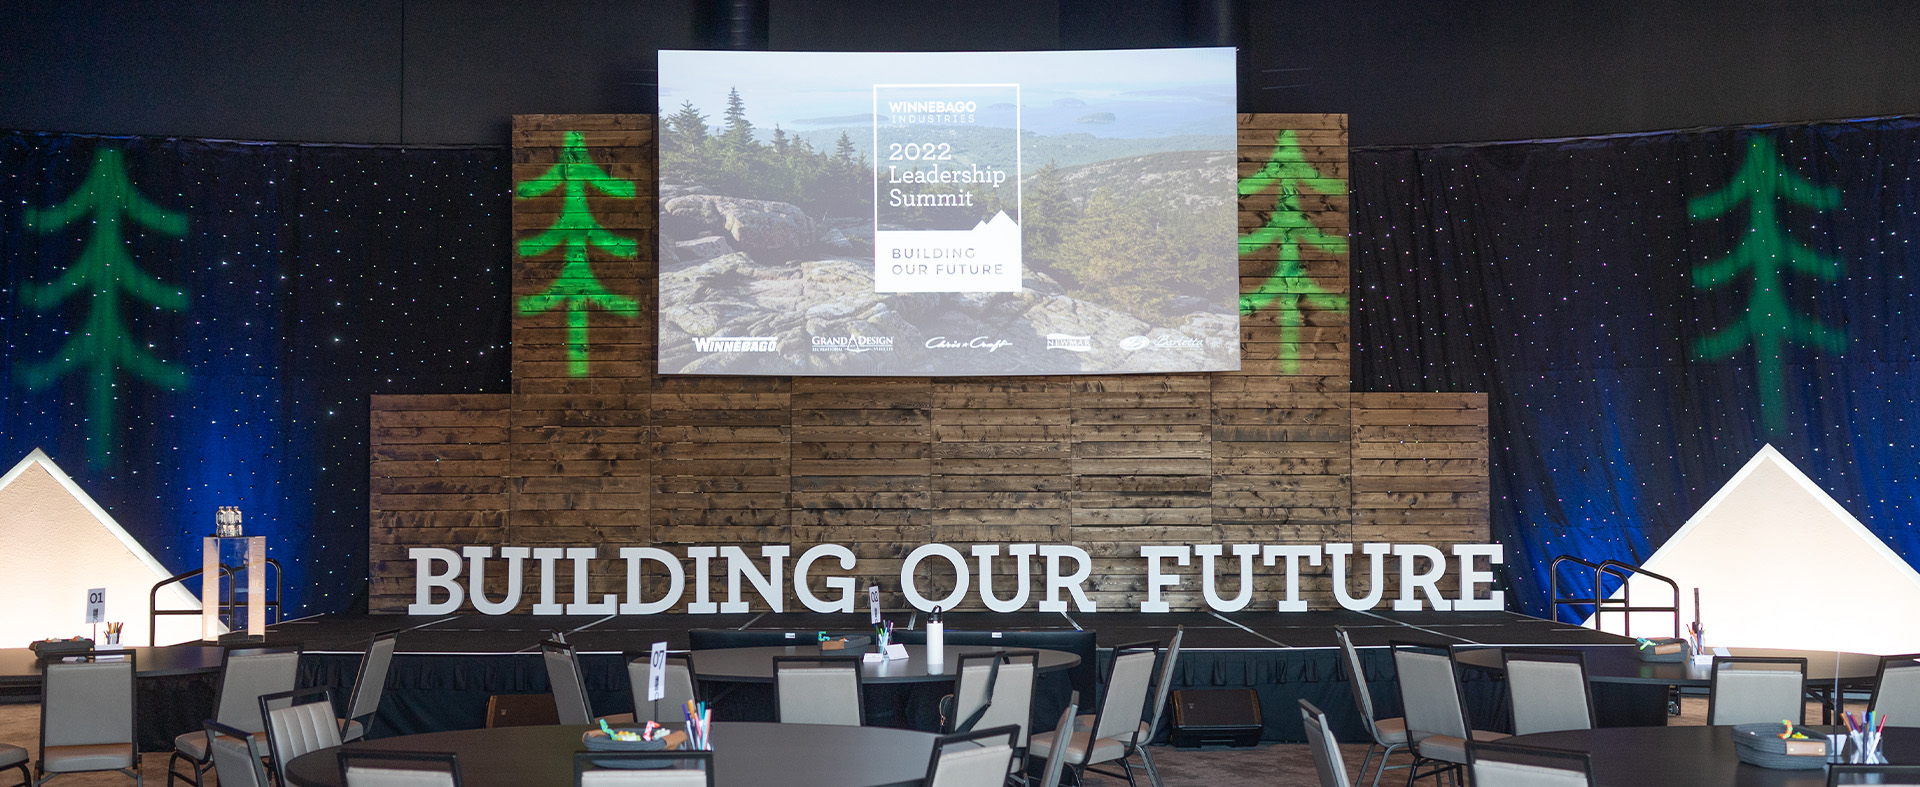 building our future sign in meeting room